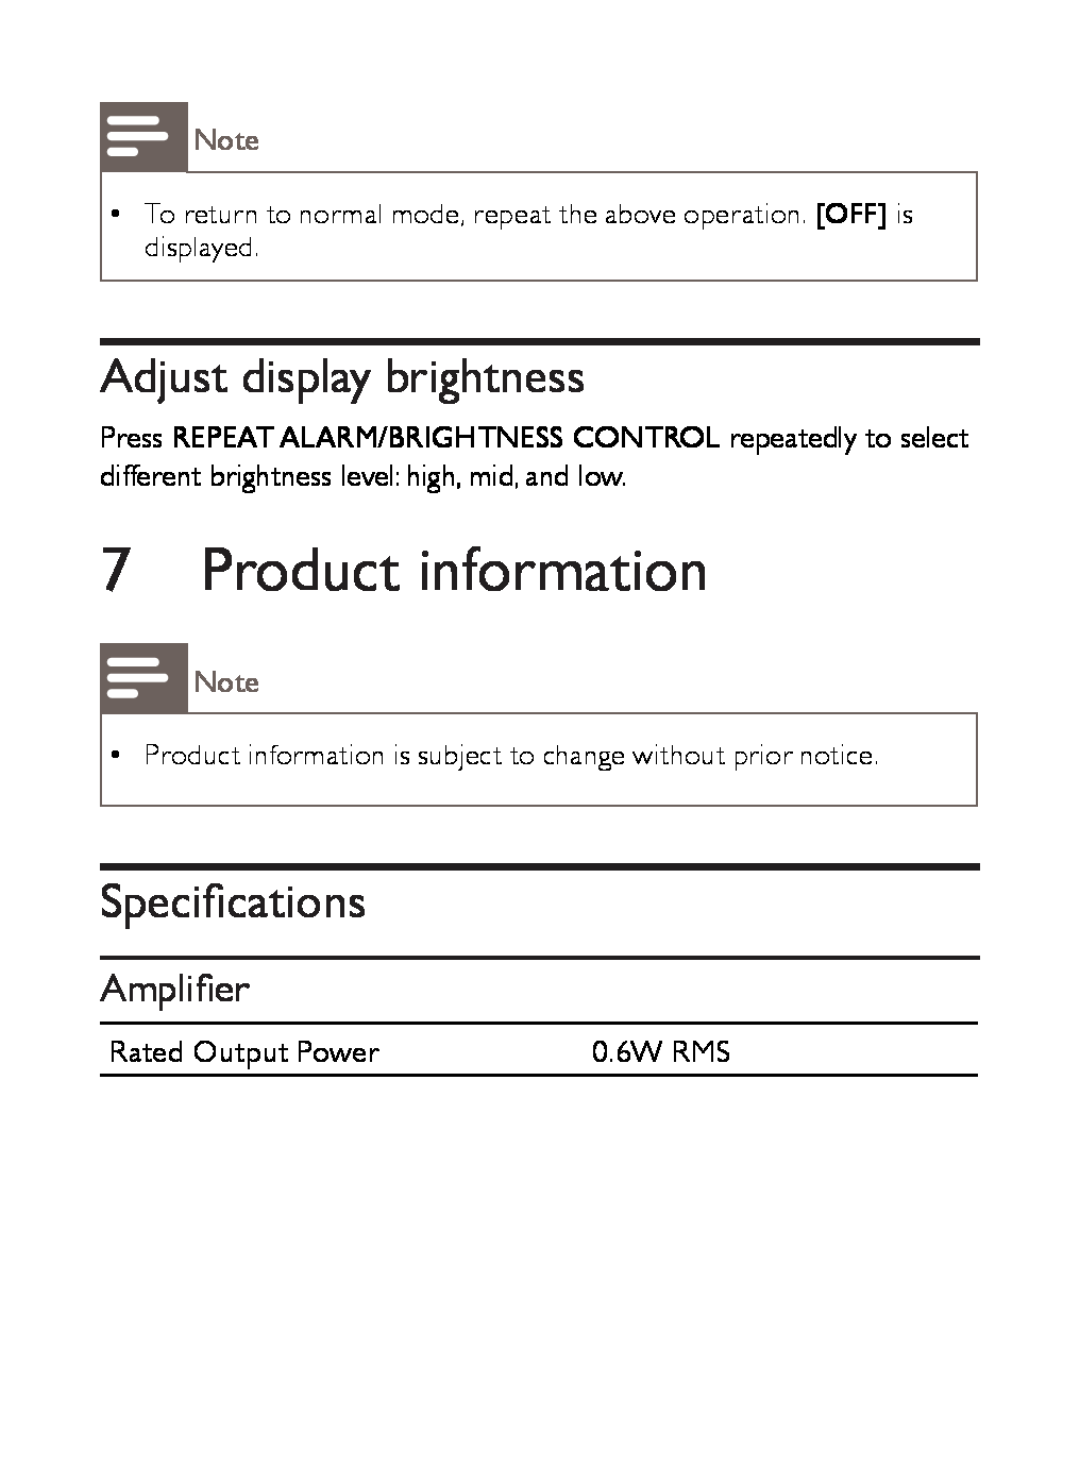 Philips AJ3500 user manual Product information, Adjust display brightness, Specifications, Amplifier 